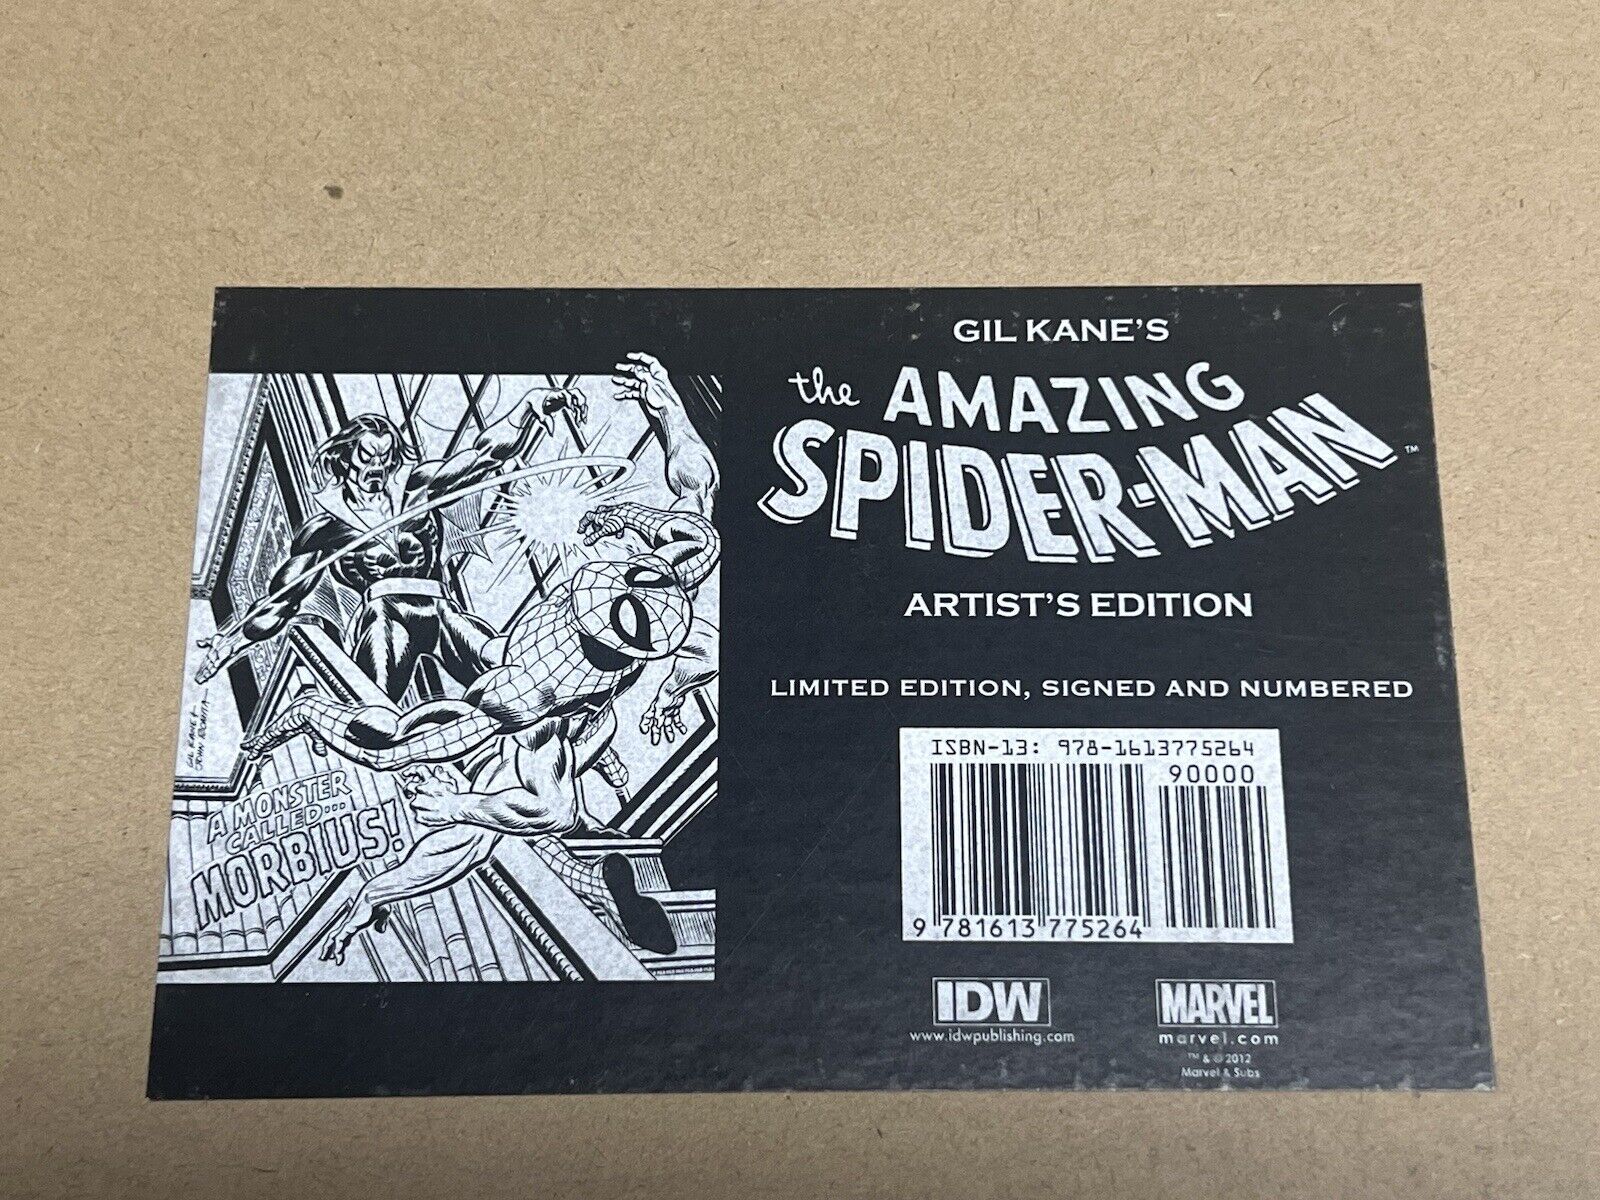 GIL KANE’S AMAZING SPIDER-MAN ARTIST EDITION HARDCOVER LIMITED EDITION VARIANT